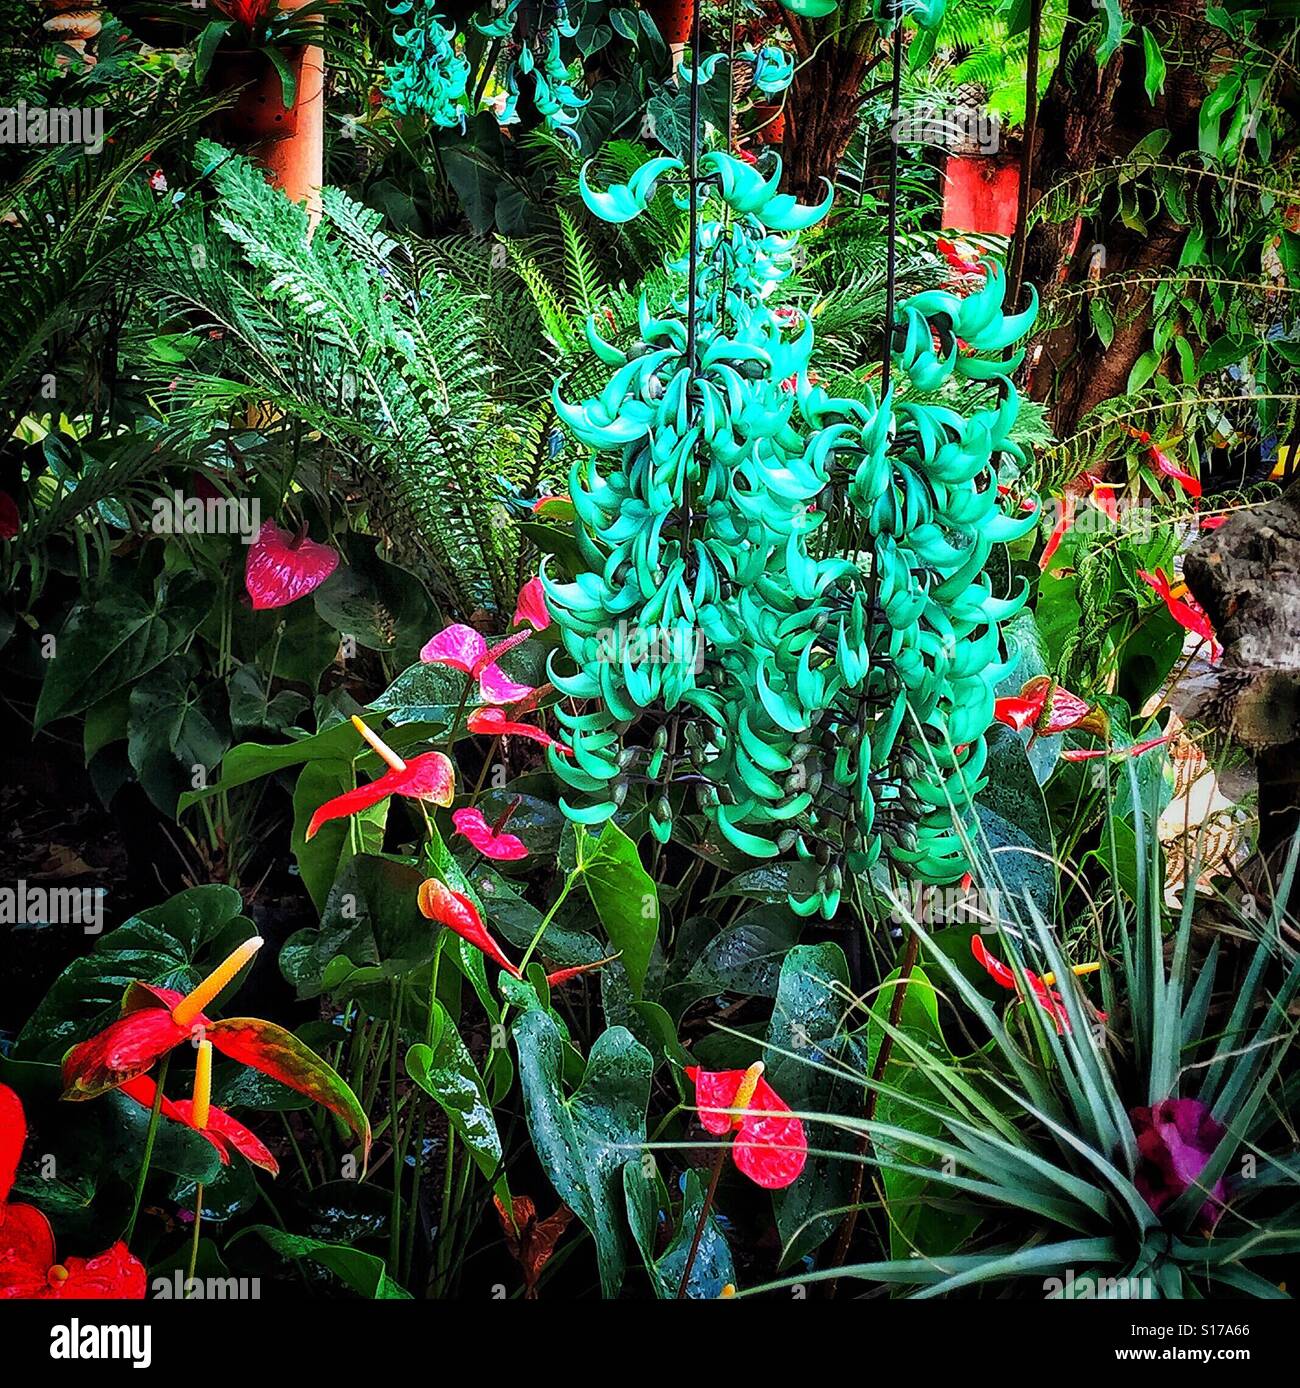 Hanging jade vine steals the spotlight in this beautiful section of the Puerto Vallarta Botanical Garden. Stock Photo